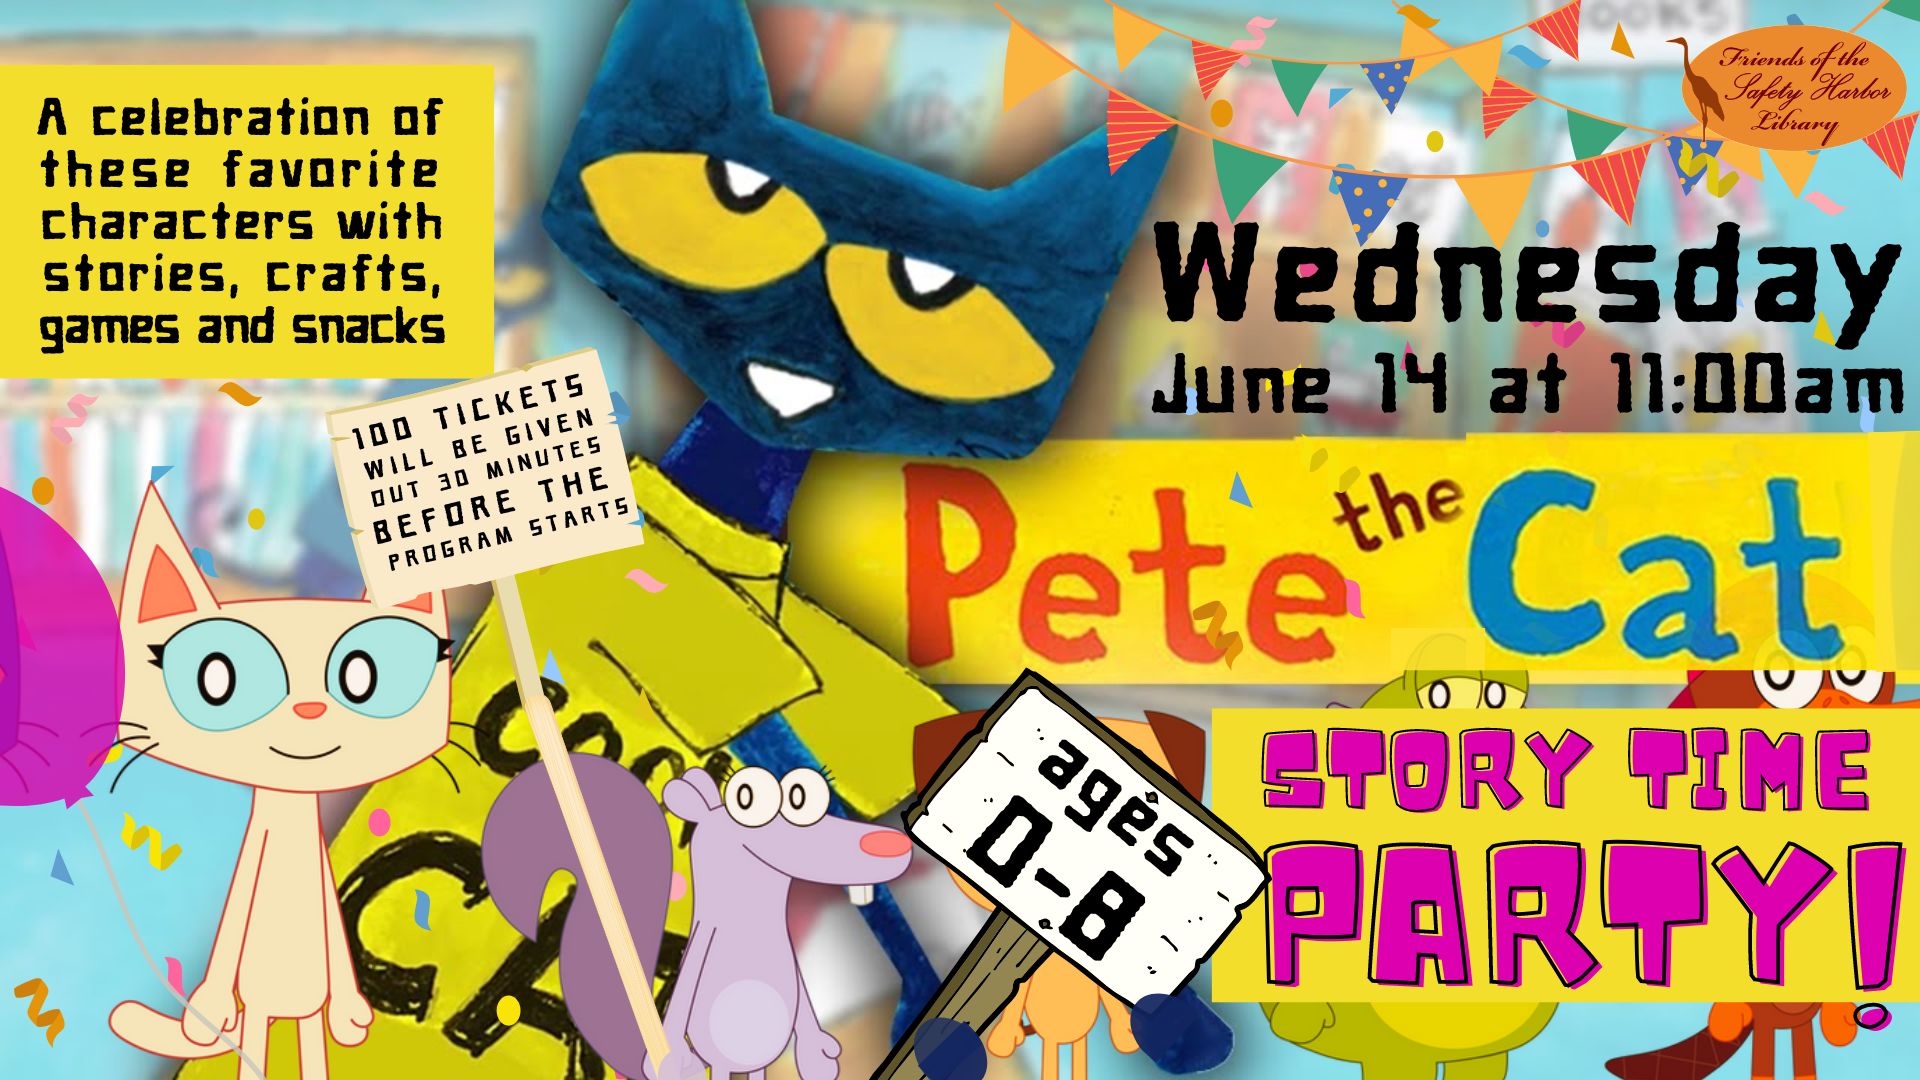 Pete the cat story time party 